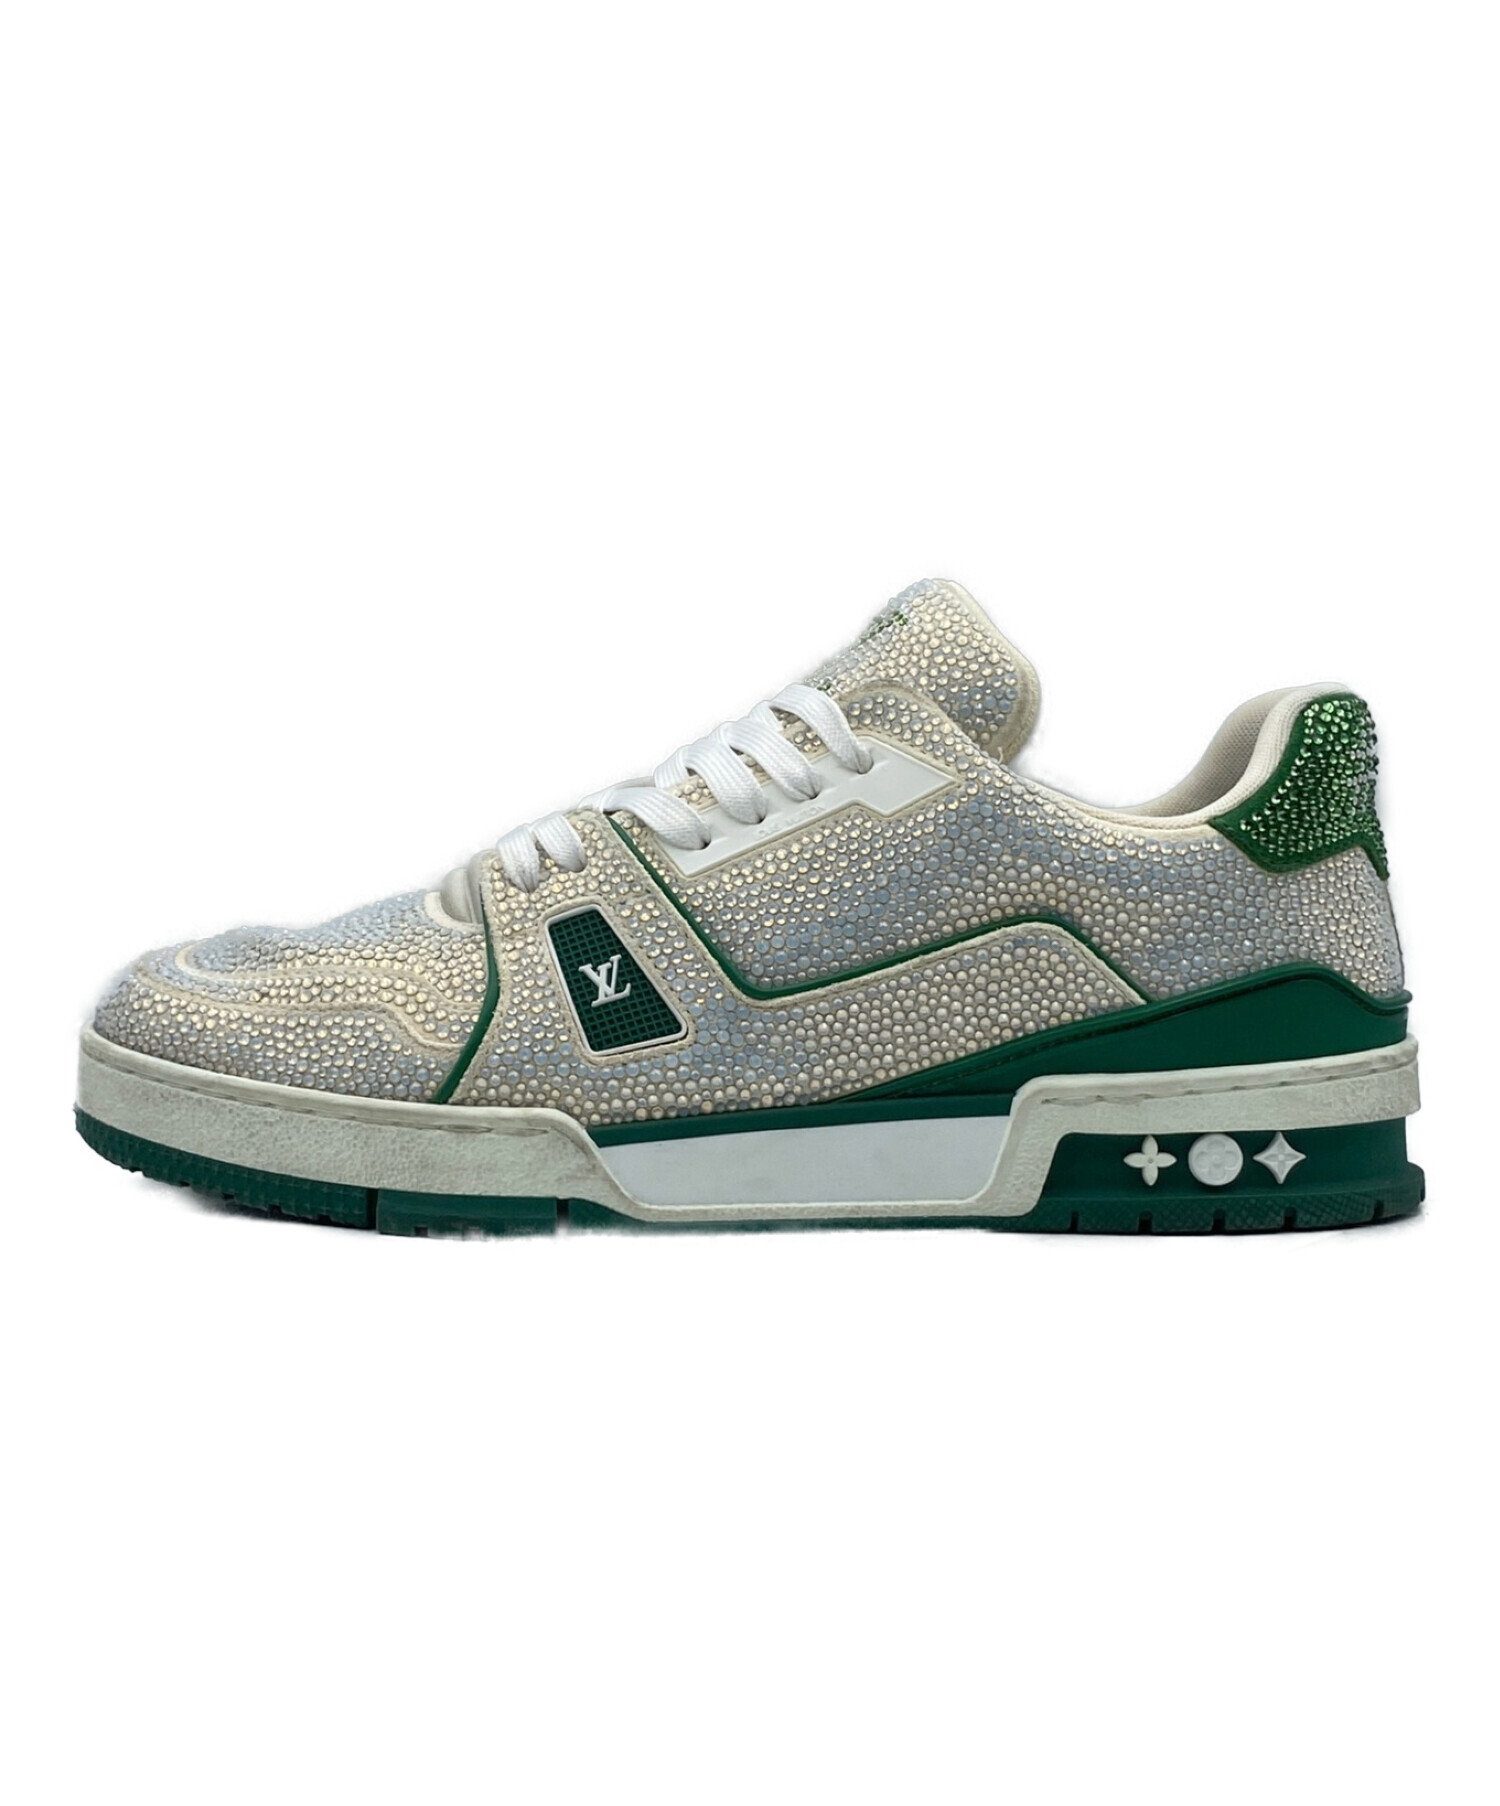 LOUIS VUITTON (ルイ ヴィトン) Crystal-Covered LV Trainer Green Strass ホワイト×グリーン  サイズ:SIZE 7